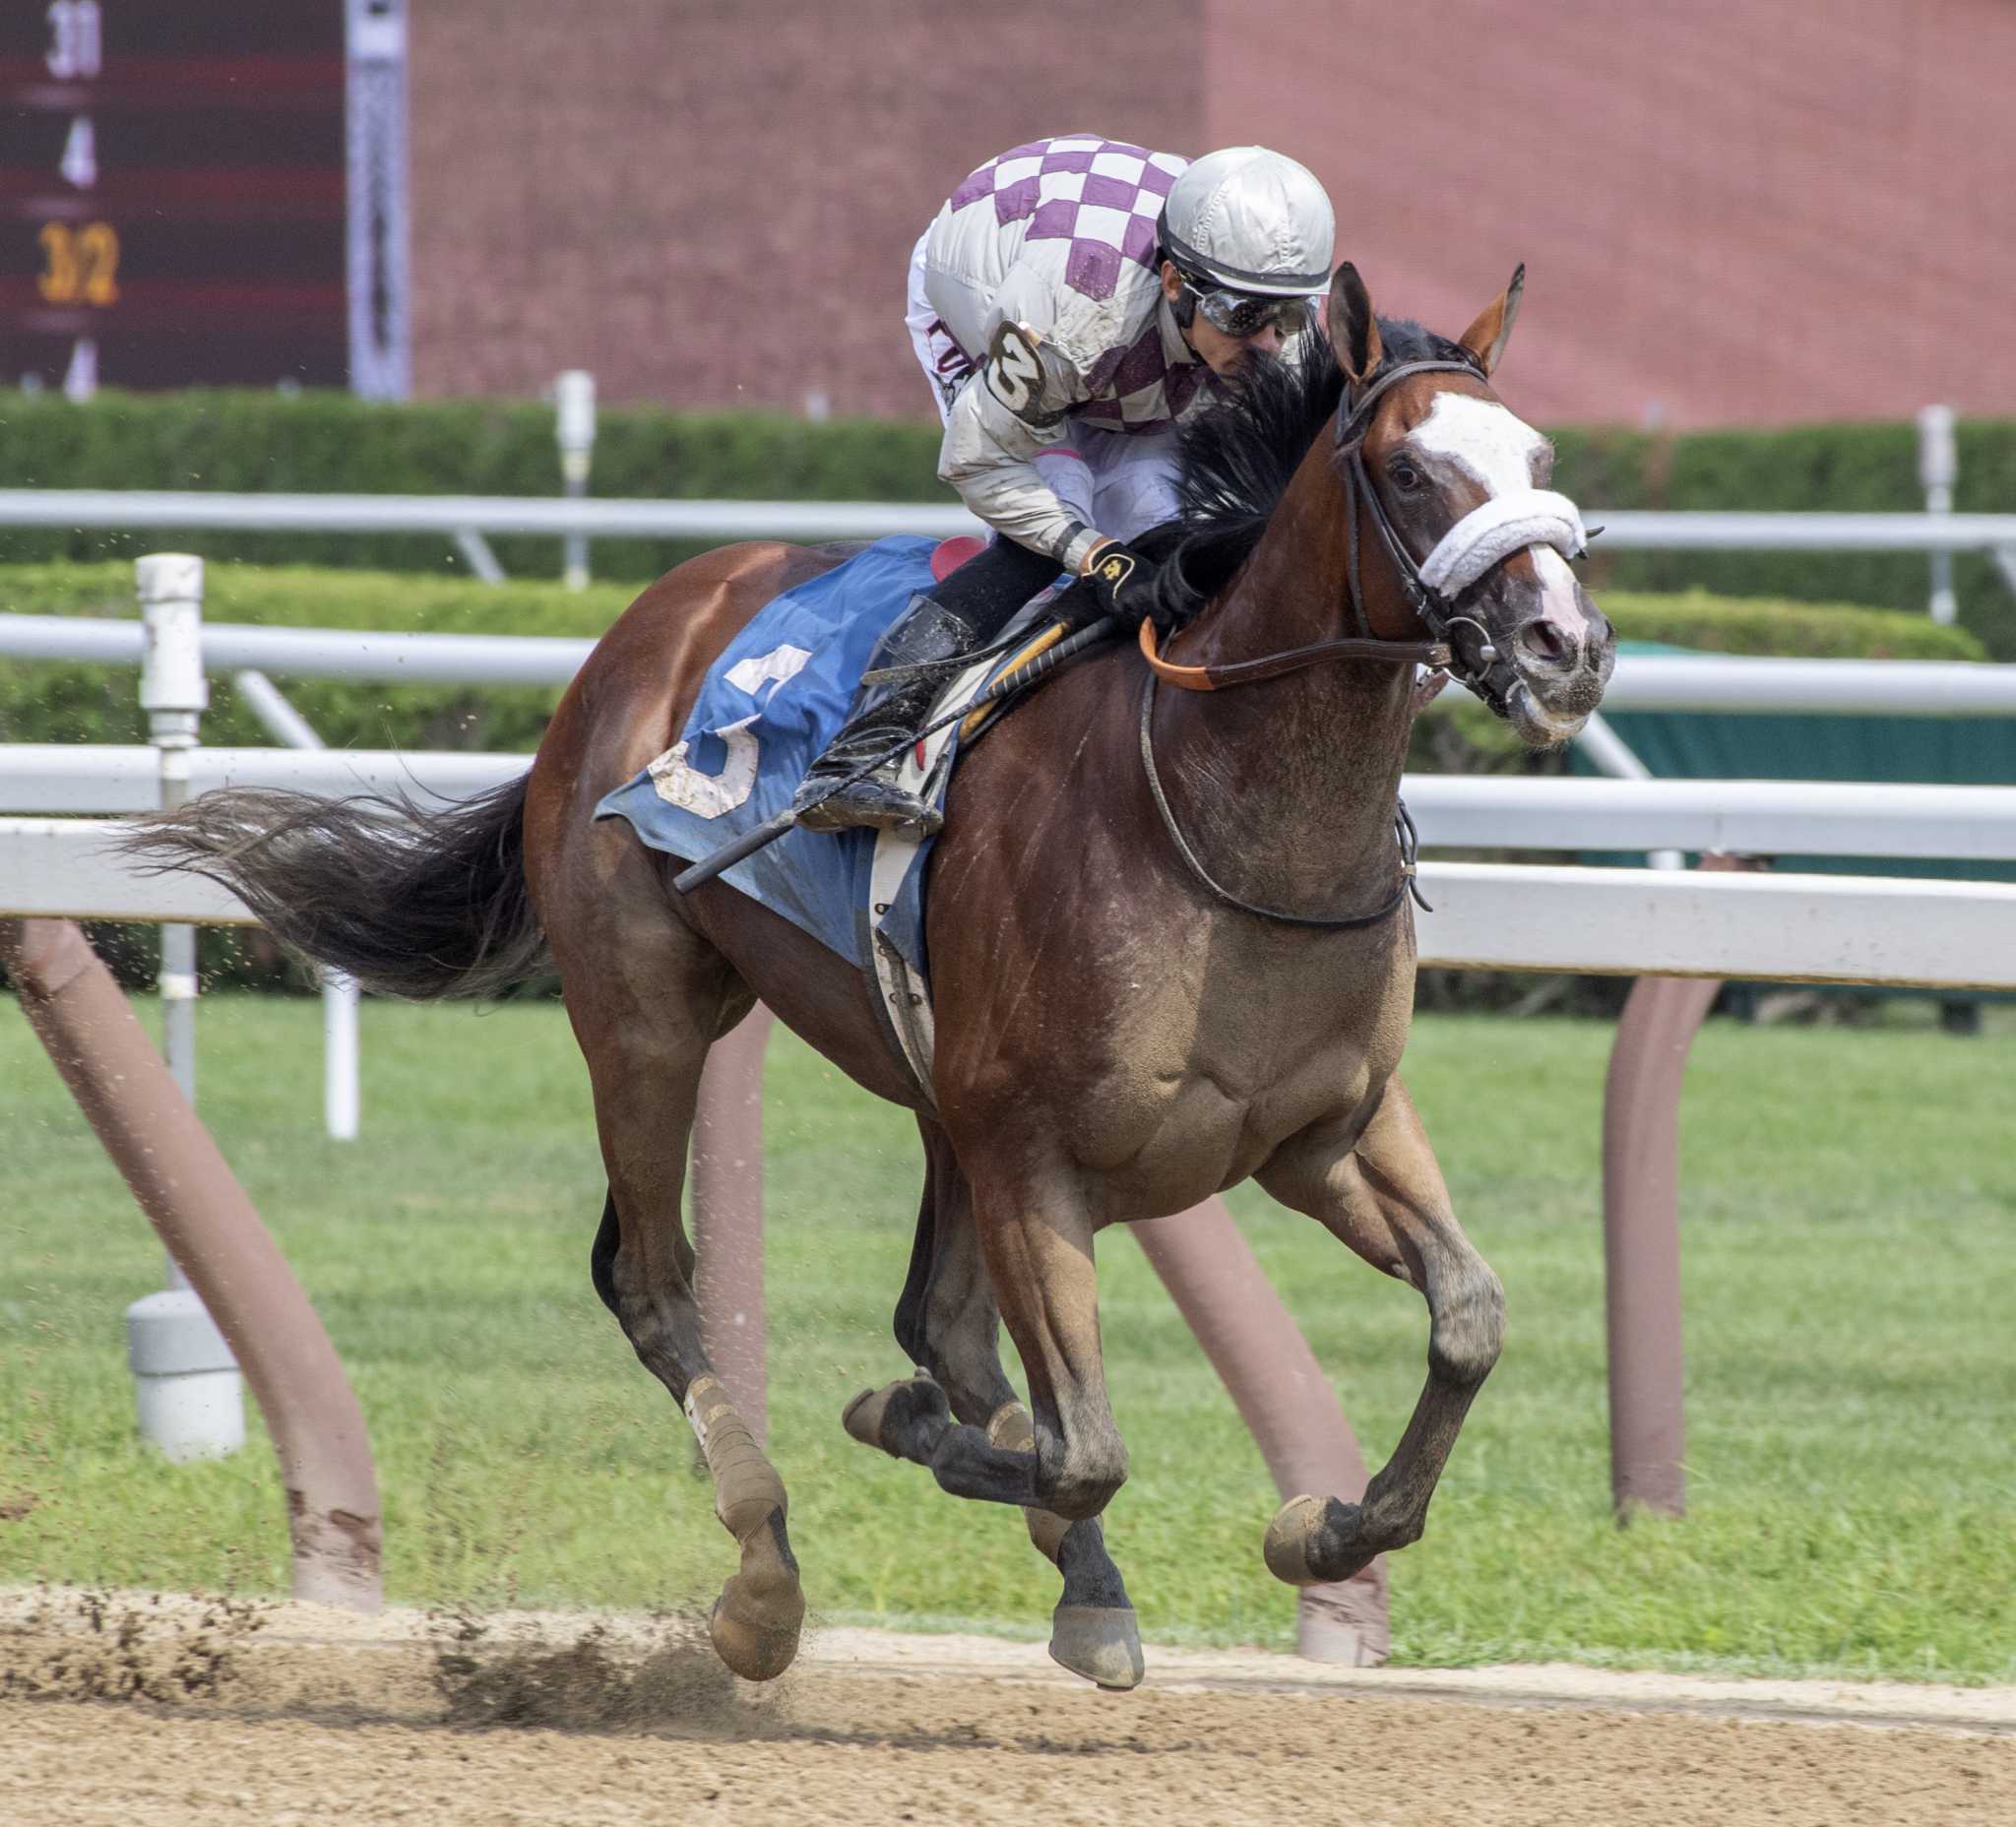 Tiz the Law was throttled back after building a commanding lead by jockey Junior Alvarado to win the 5th race on the card at the Saratoga Race Course waiting to watch one of his horses to work Thursday Aug. 8, 2019 in Saratoga Springs, N.Y. Managing partner of Sacktoga Stables who owns Tiz the Law said in the winnerÃ•s circle that this horse was second best horse he has had in the stable.  Sackatoga was the owner of Kentucky Derby and Preakness winner Funny Cide who was also trained by Barclay Tagg.   Photo Special to the Times Union by Skip Dickstein